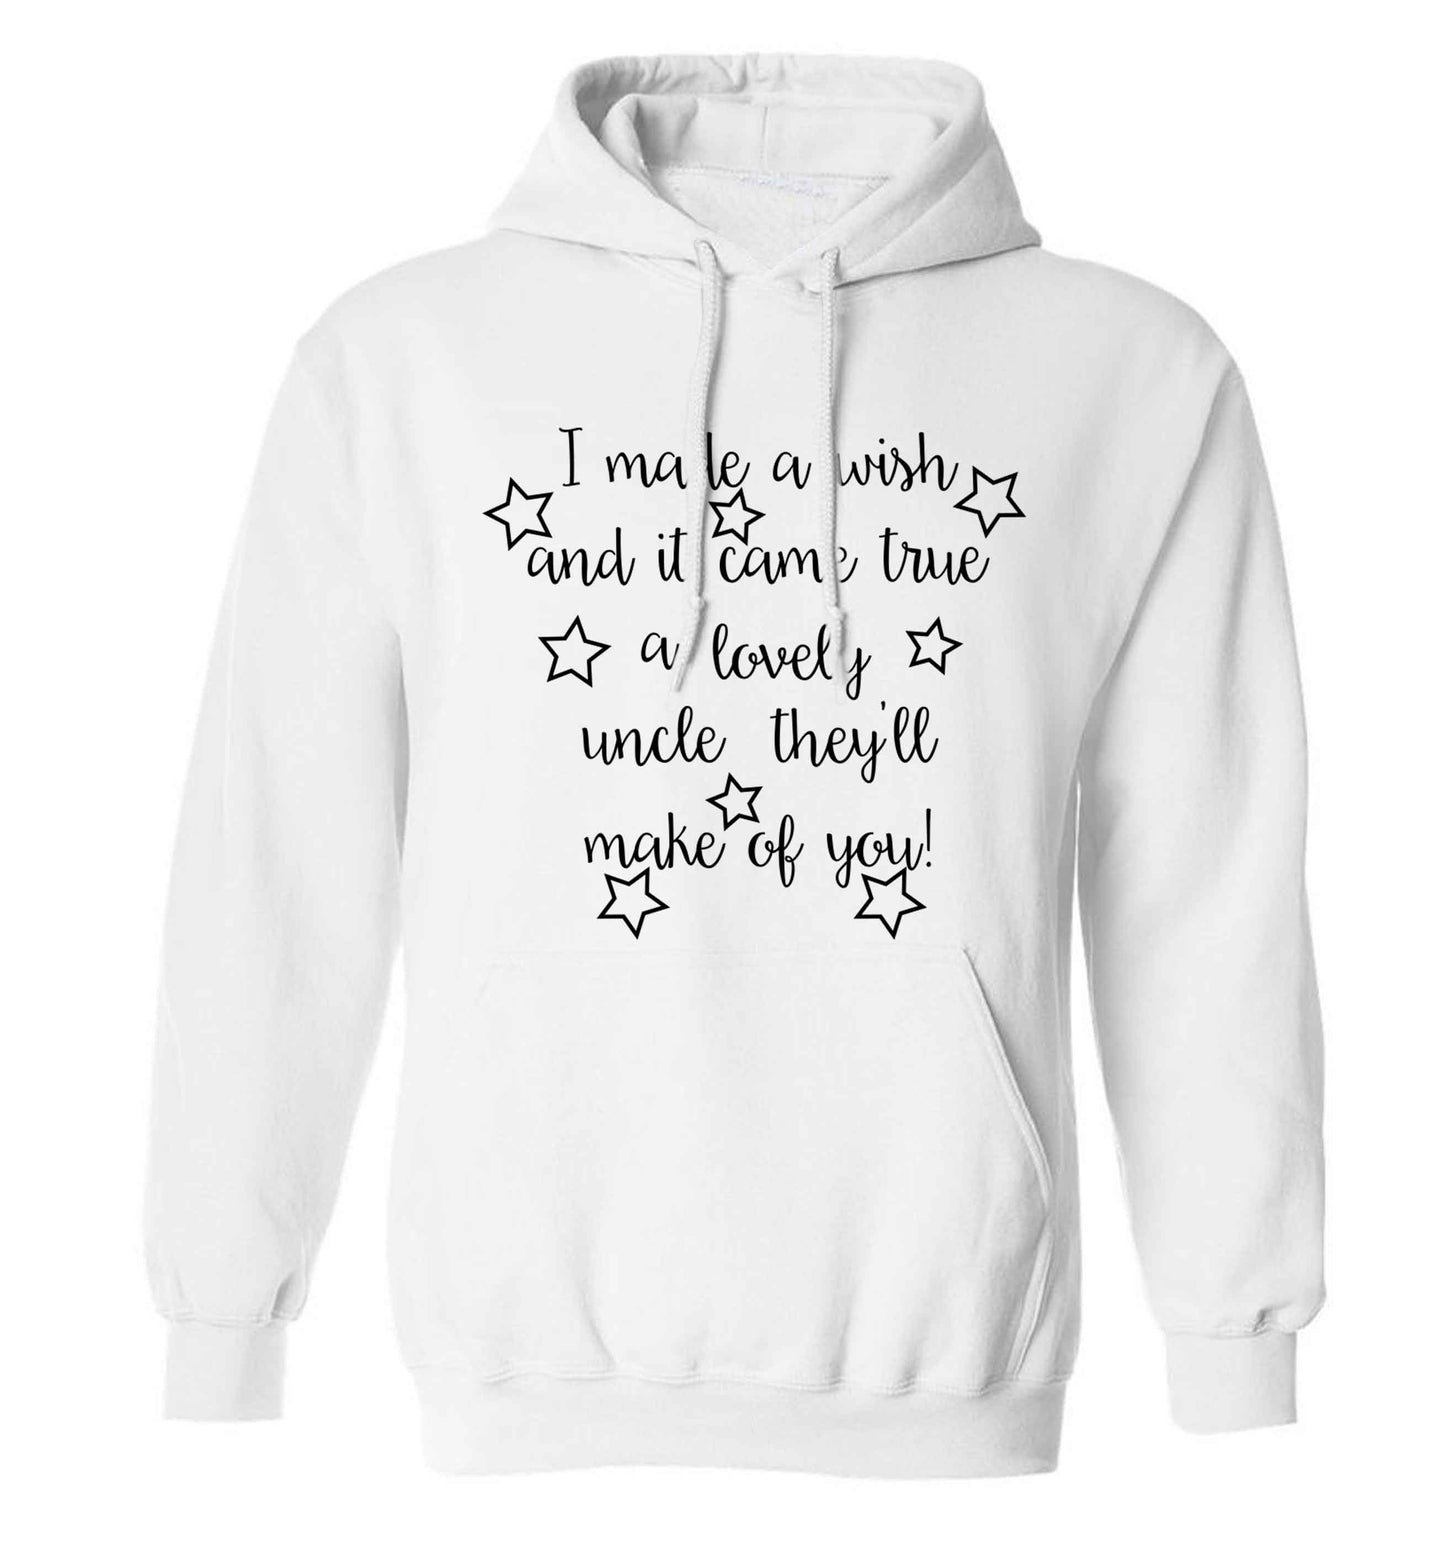 I made a wish and it came true a lovely uncle they'll make of you! adults unisex white hoodie 2XL